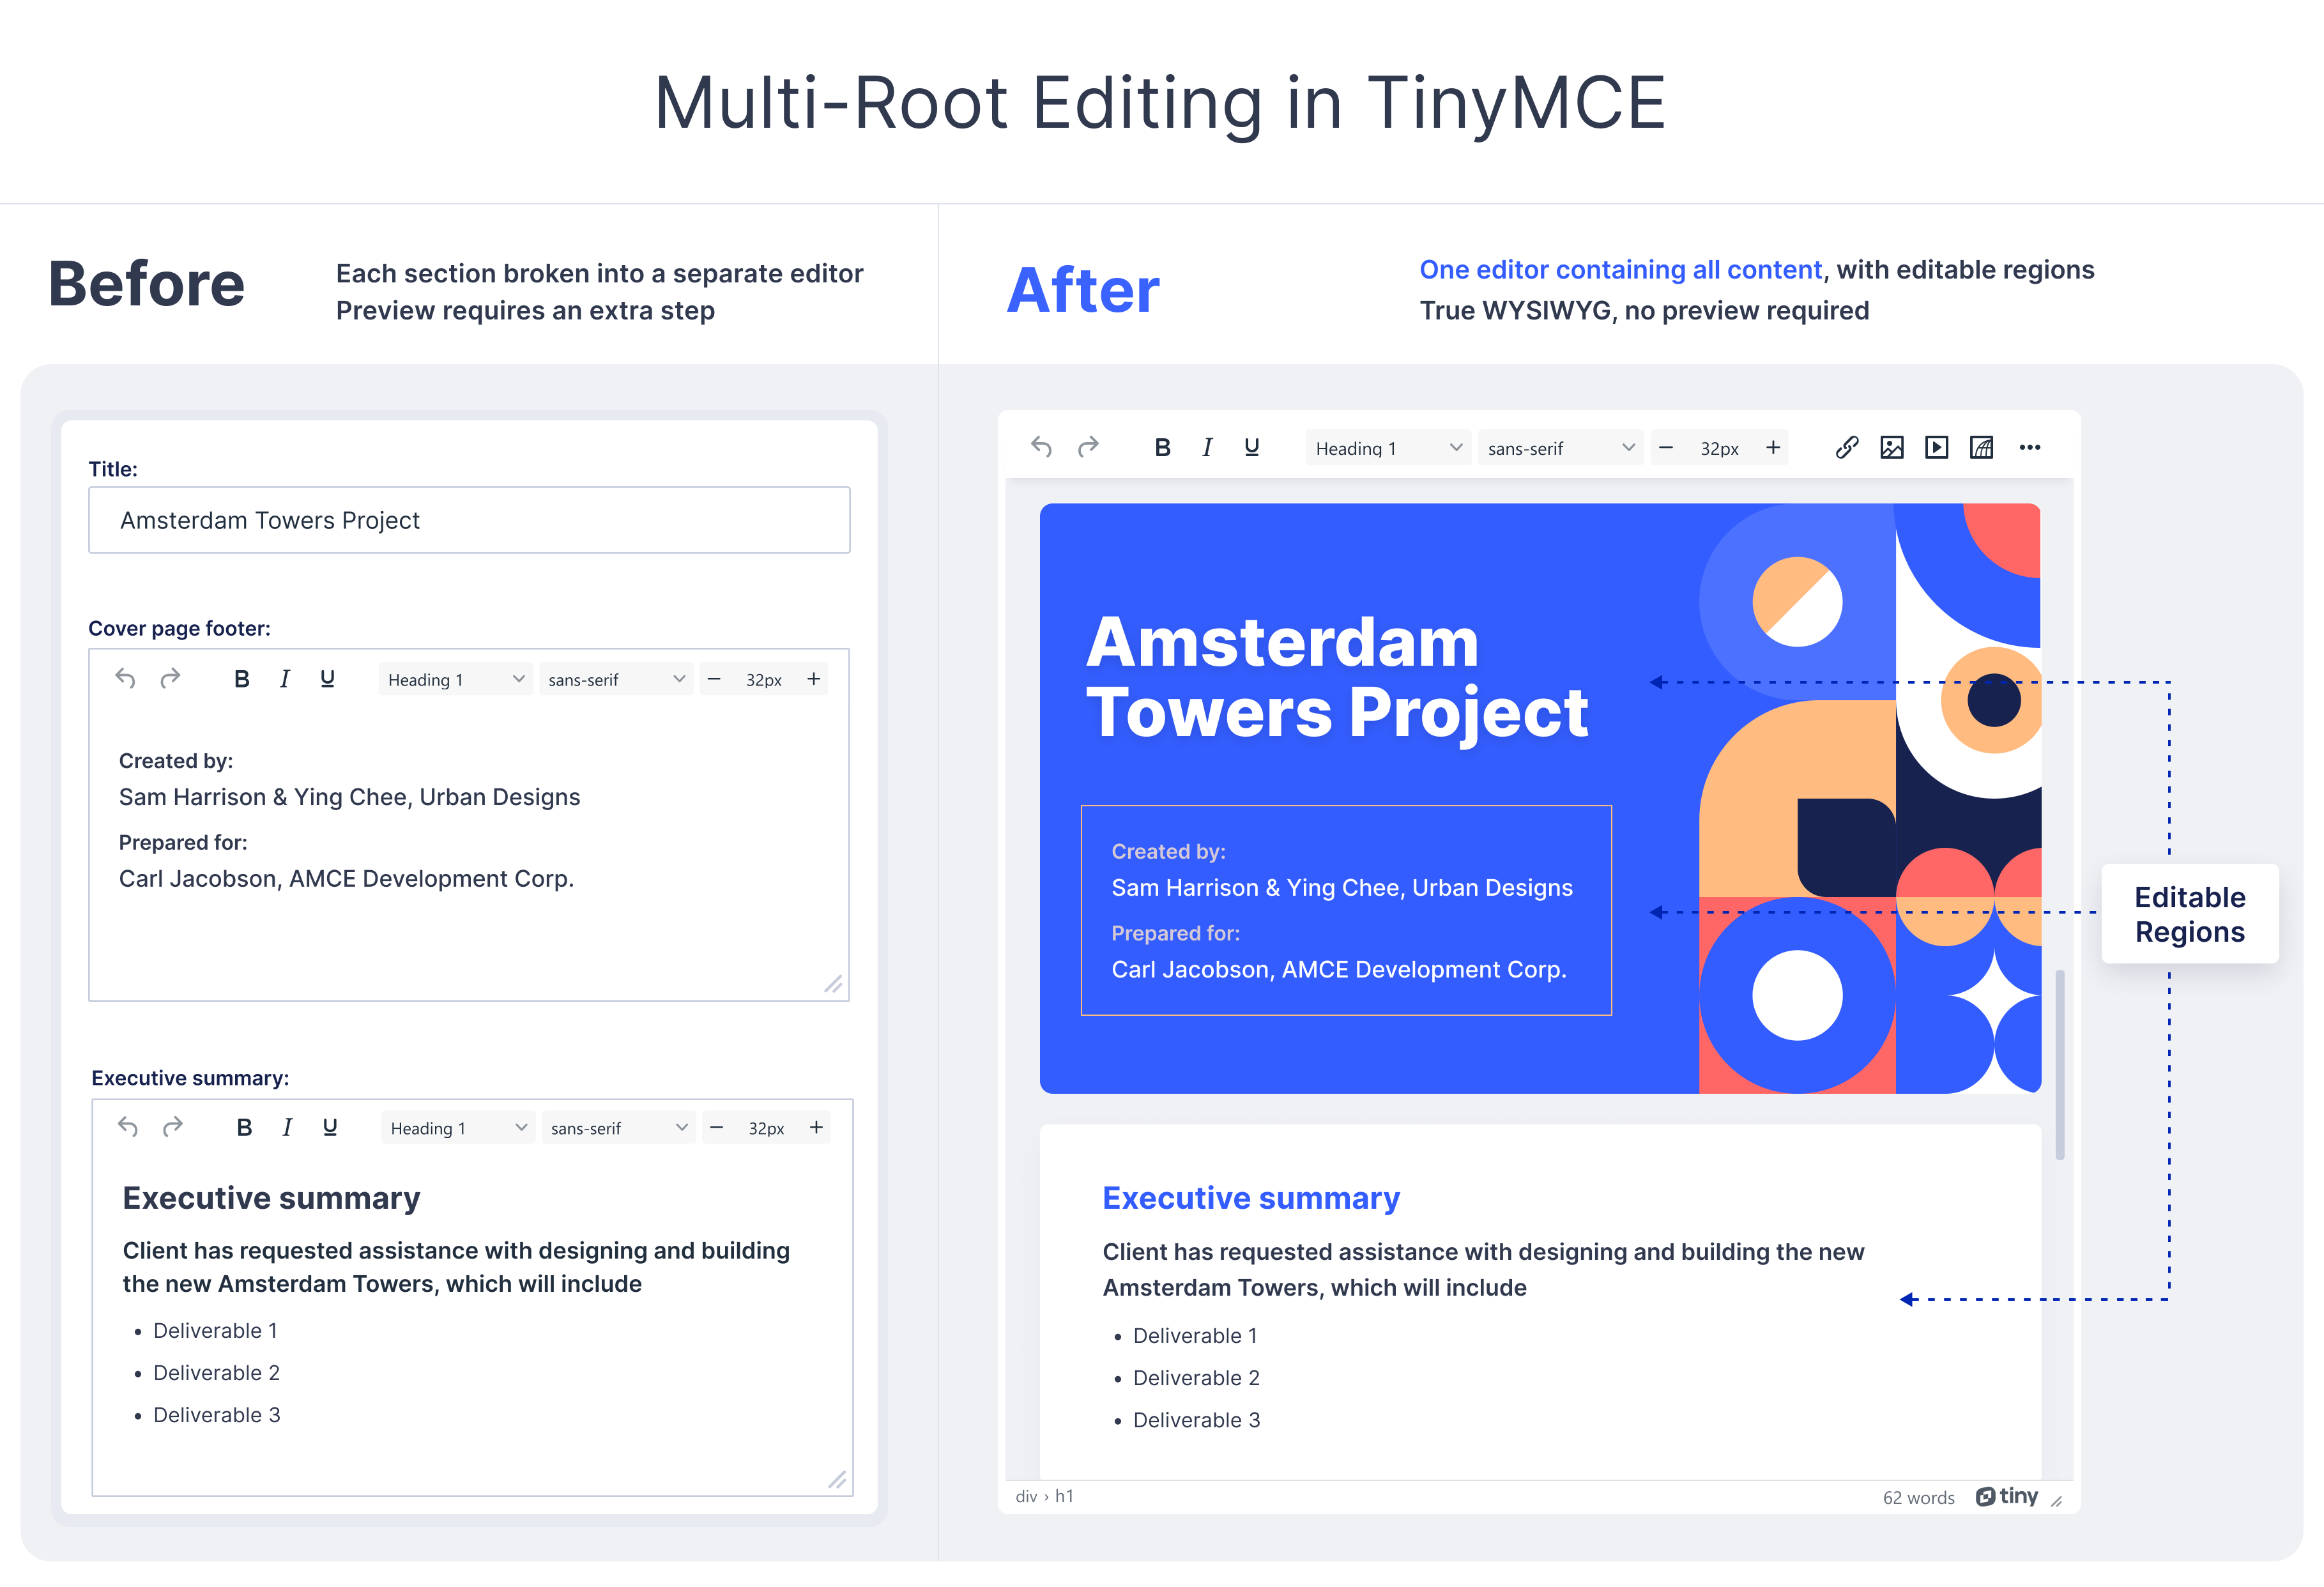 The multi-root capability enabled in TinyMCE with a vivid example